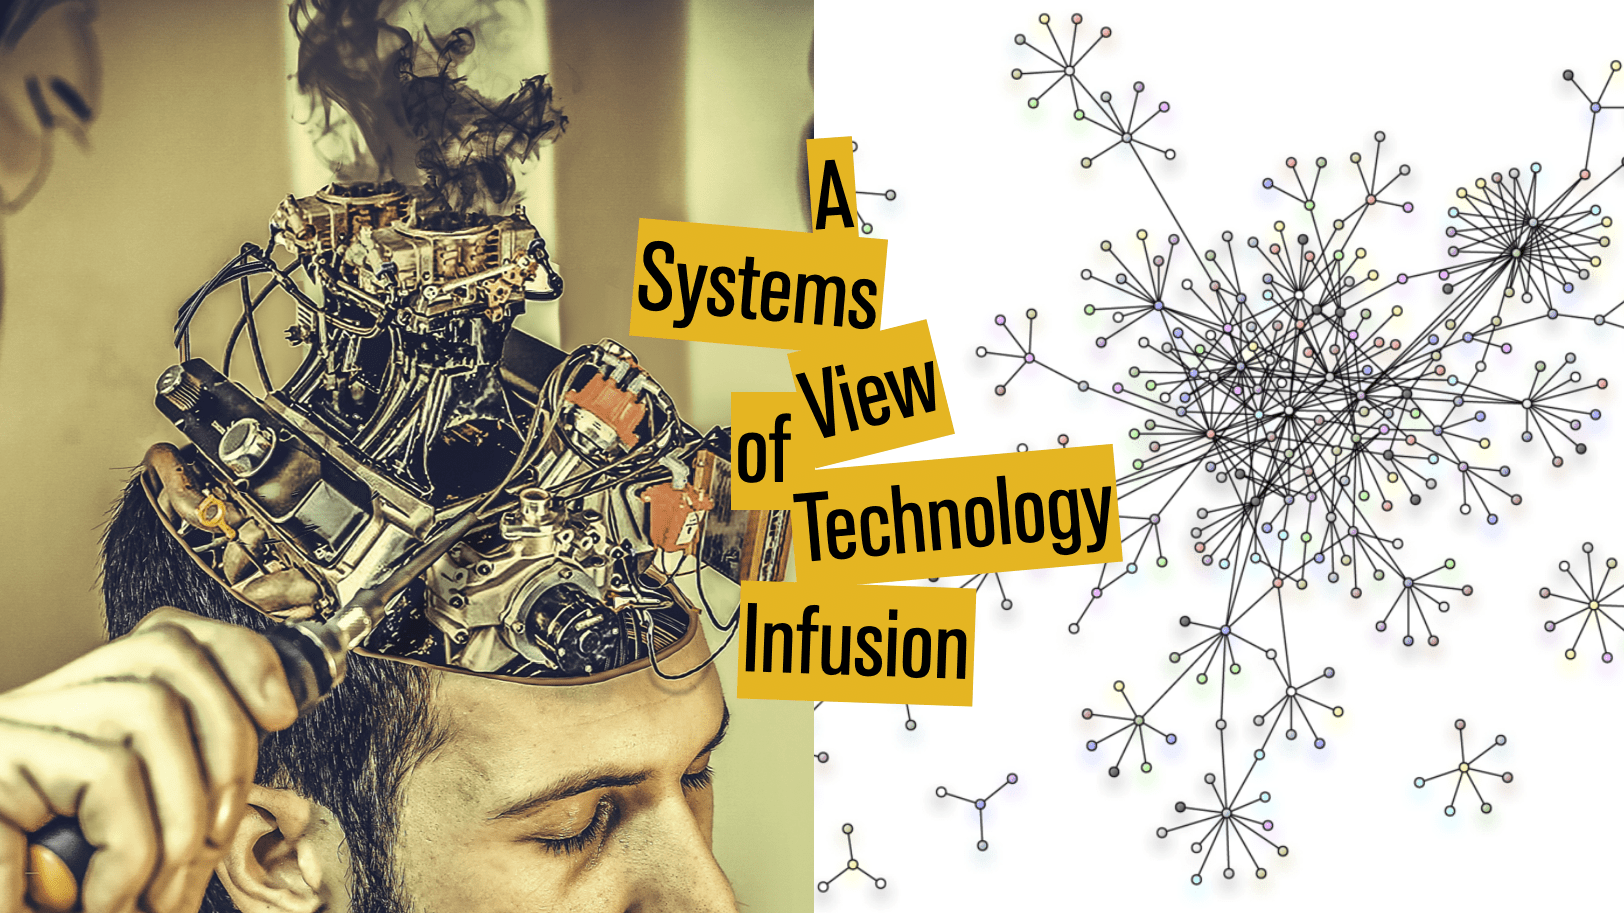 A systems view of technology infusion